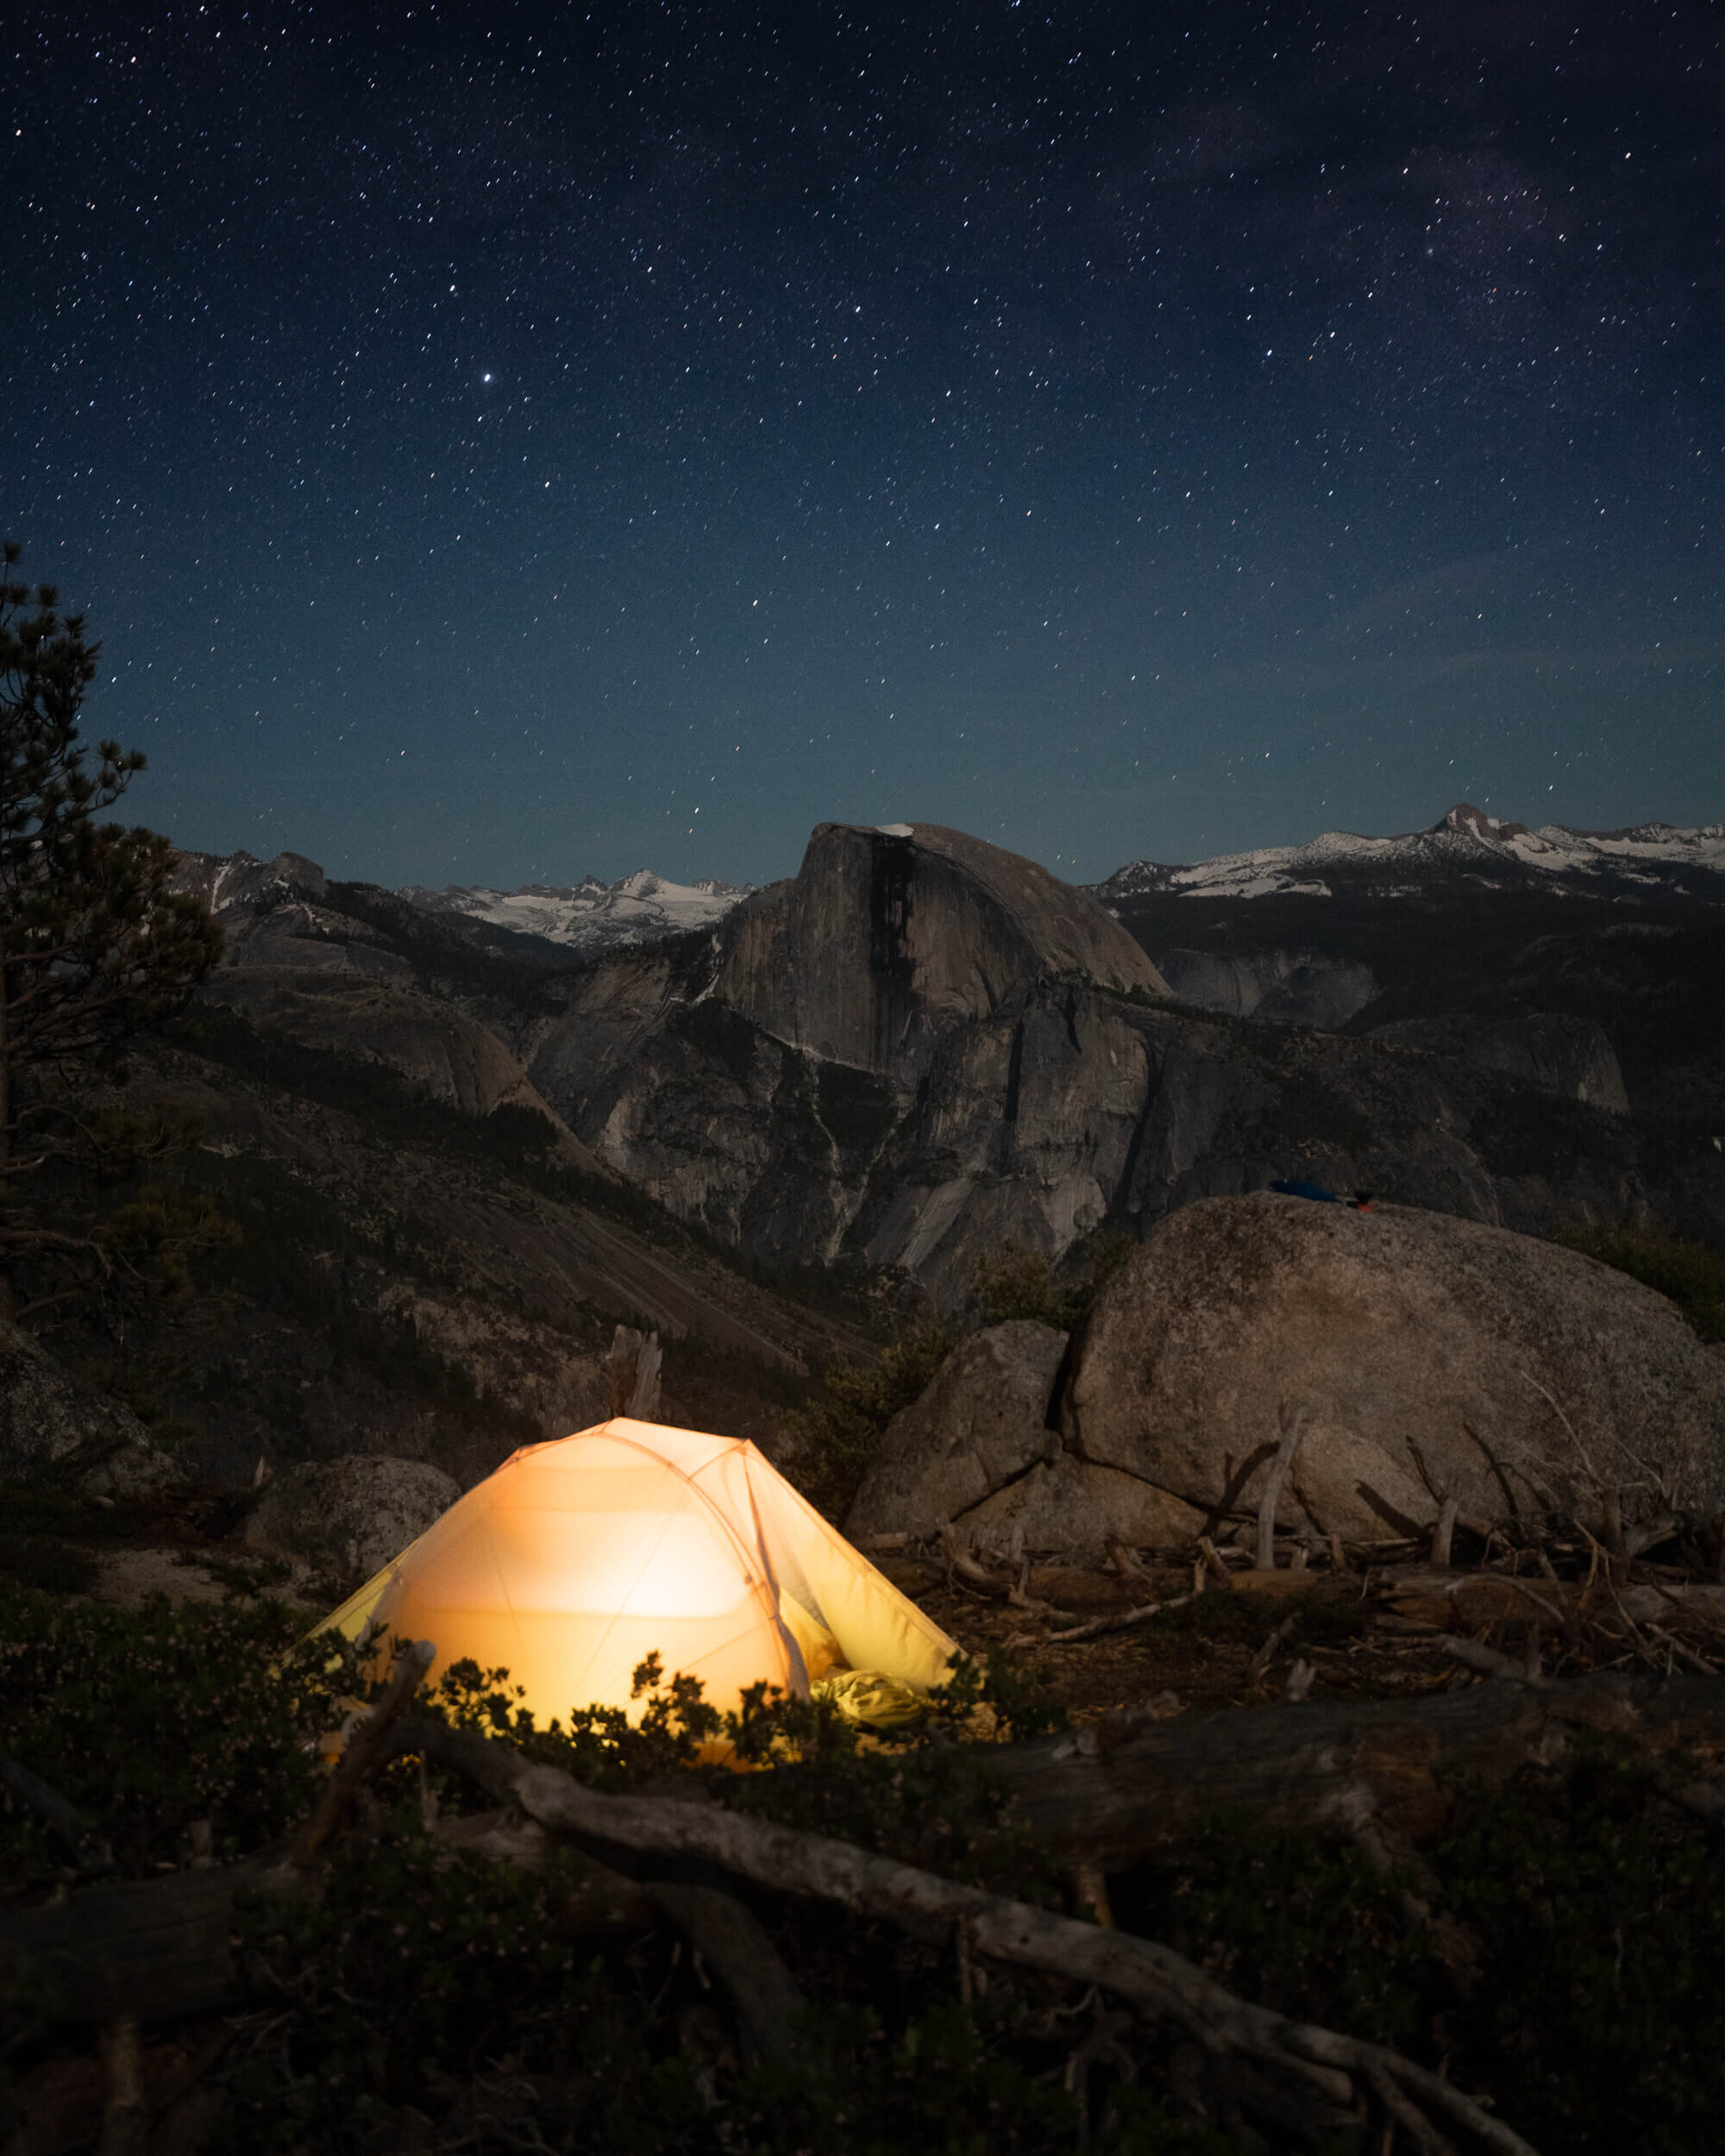 Sleeping under the stars in Yosemite National Park. Tent:  Big Agnes Tiger Wall UL2 Tent